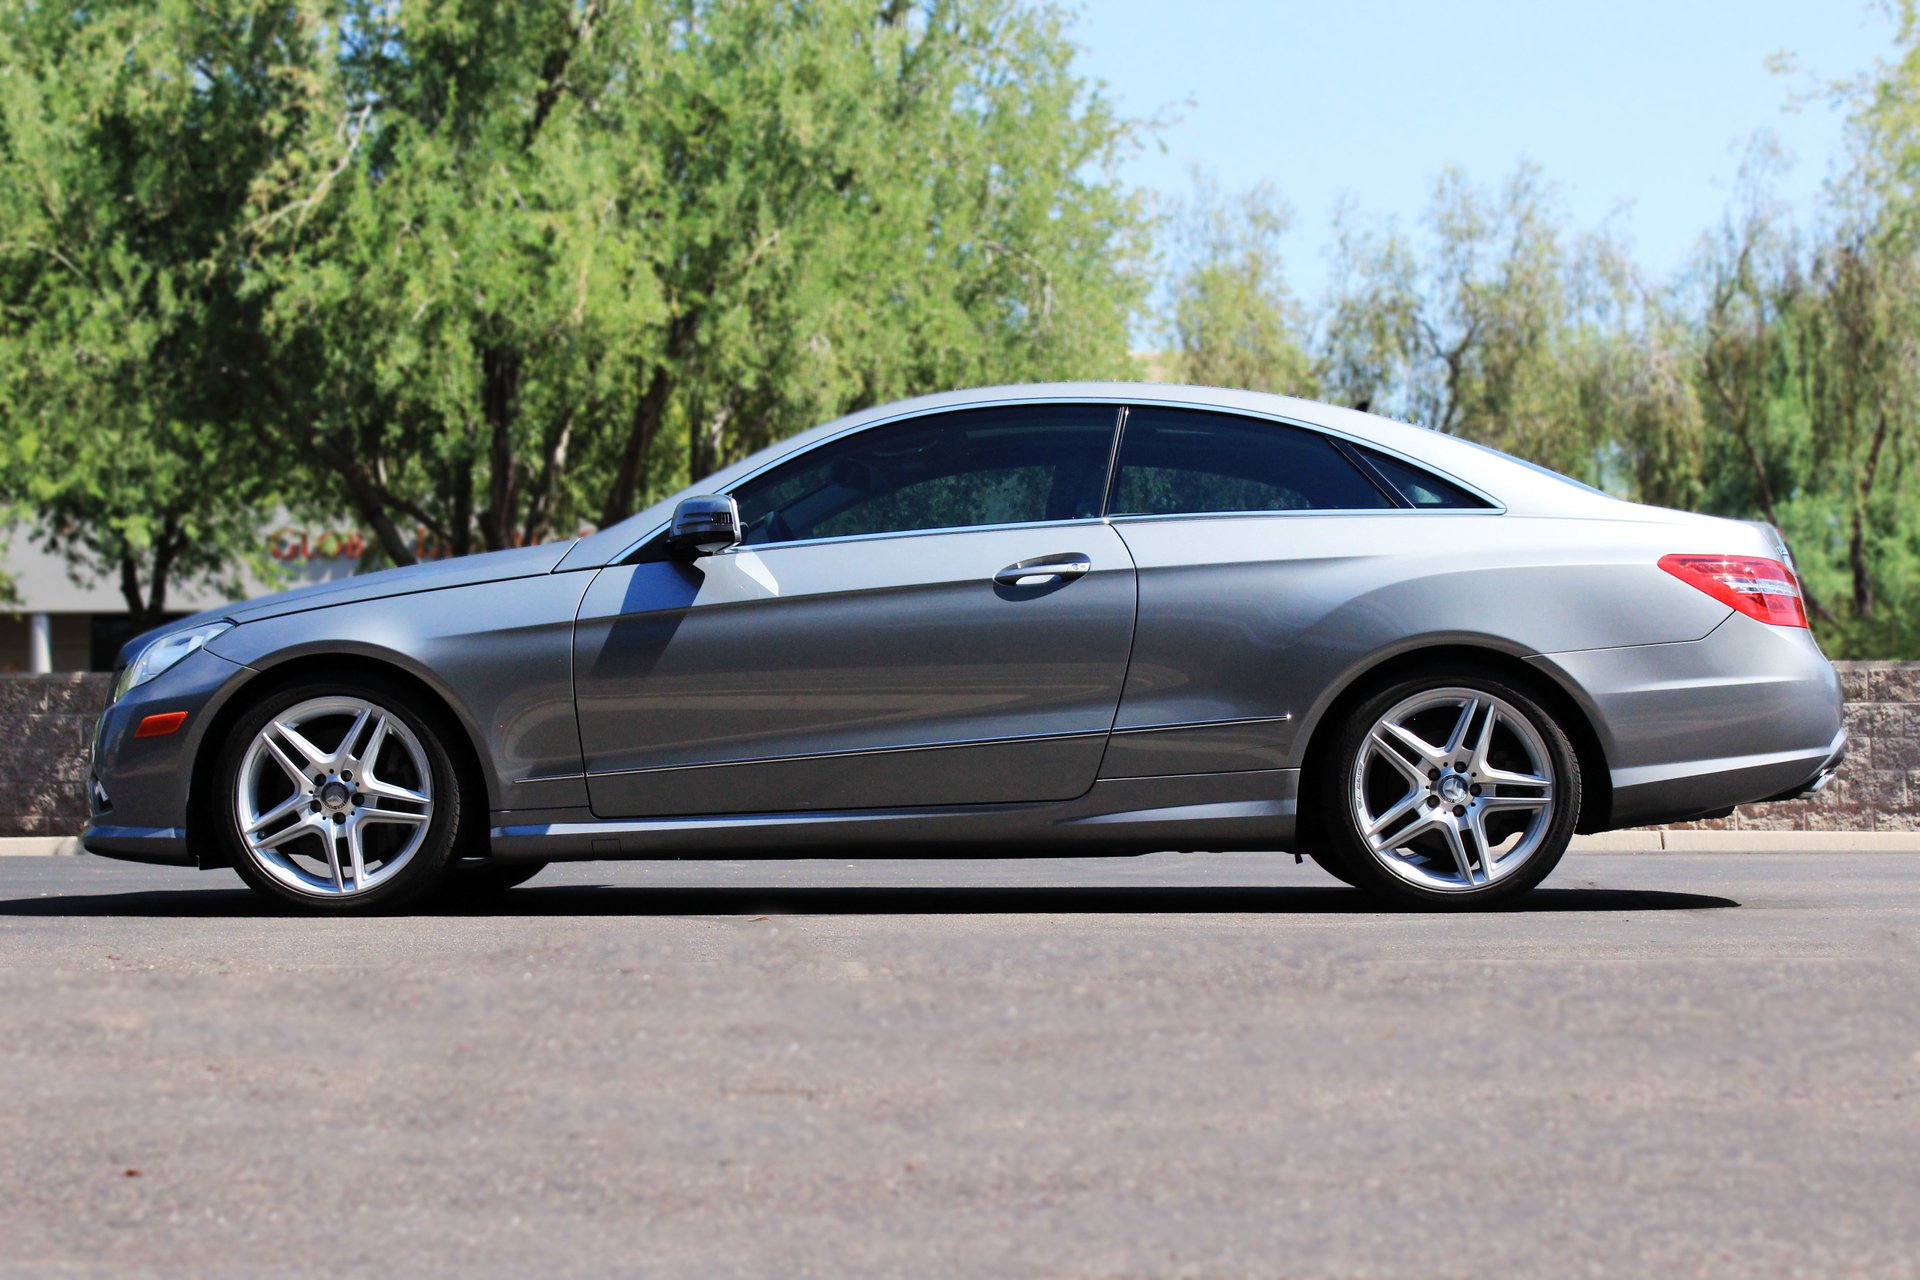 2011 Mercedes Benz E550 Coupe Classic Collectible Vehicle Storage Maintenance Consignment Sales Detailing In Scottsdale Az